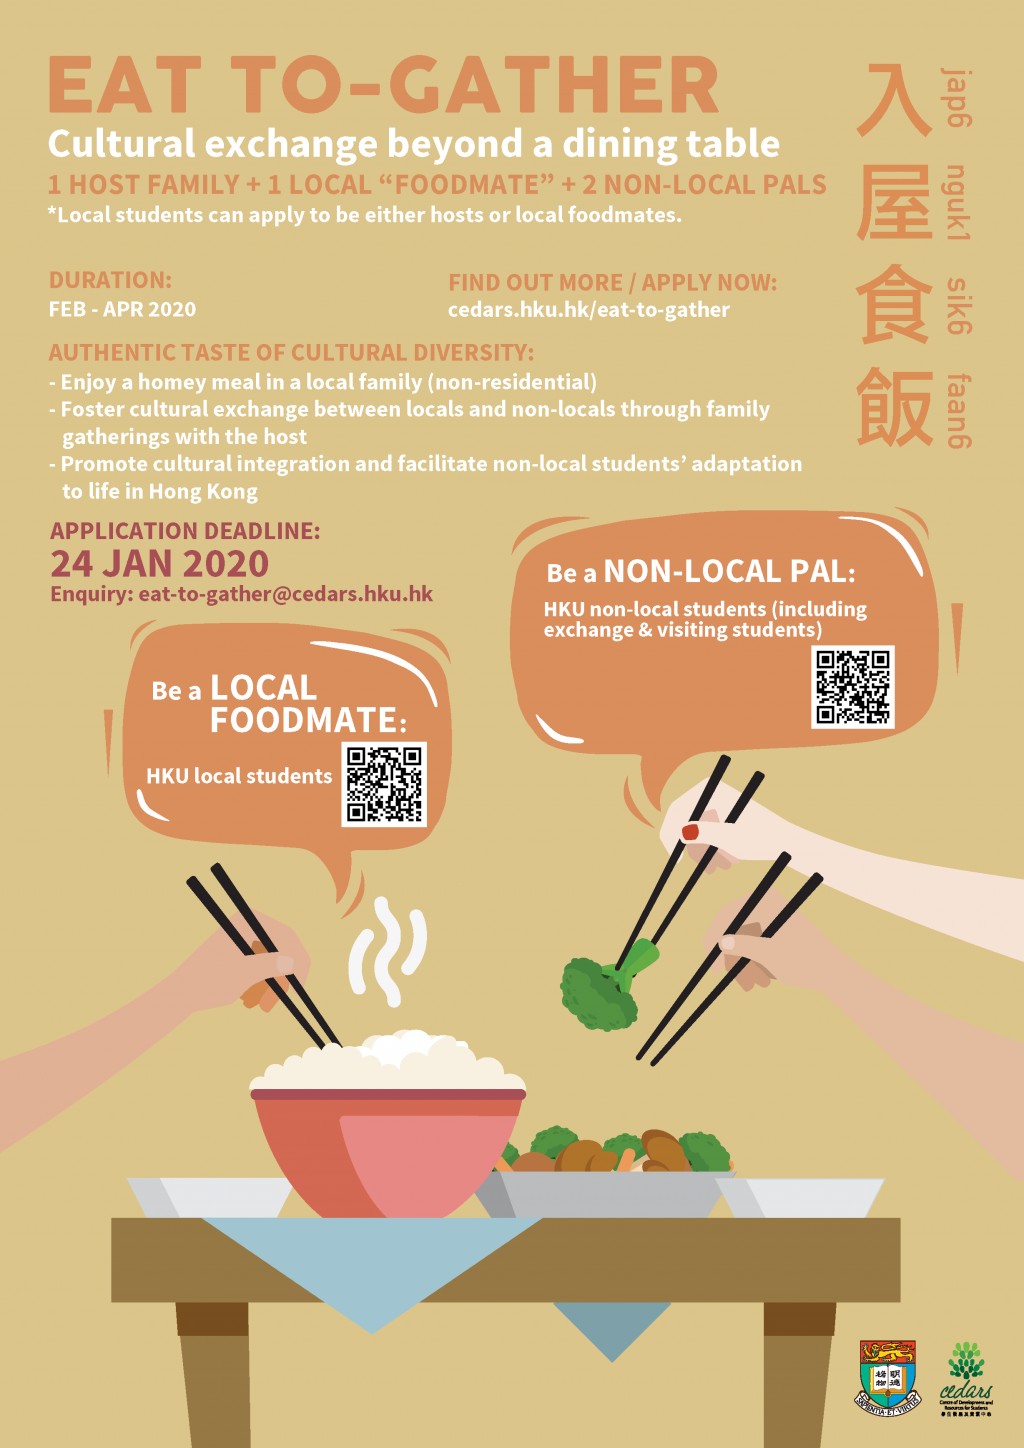 Eat To-Gather 2019-20: Calling for local and non-local students to dine for cultural exchange!